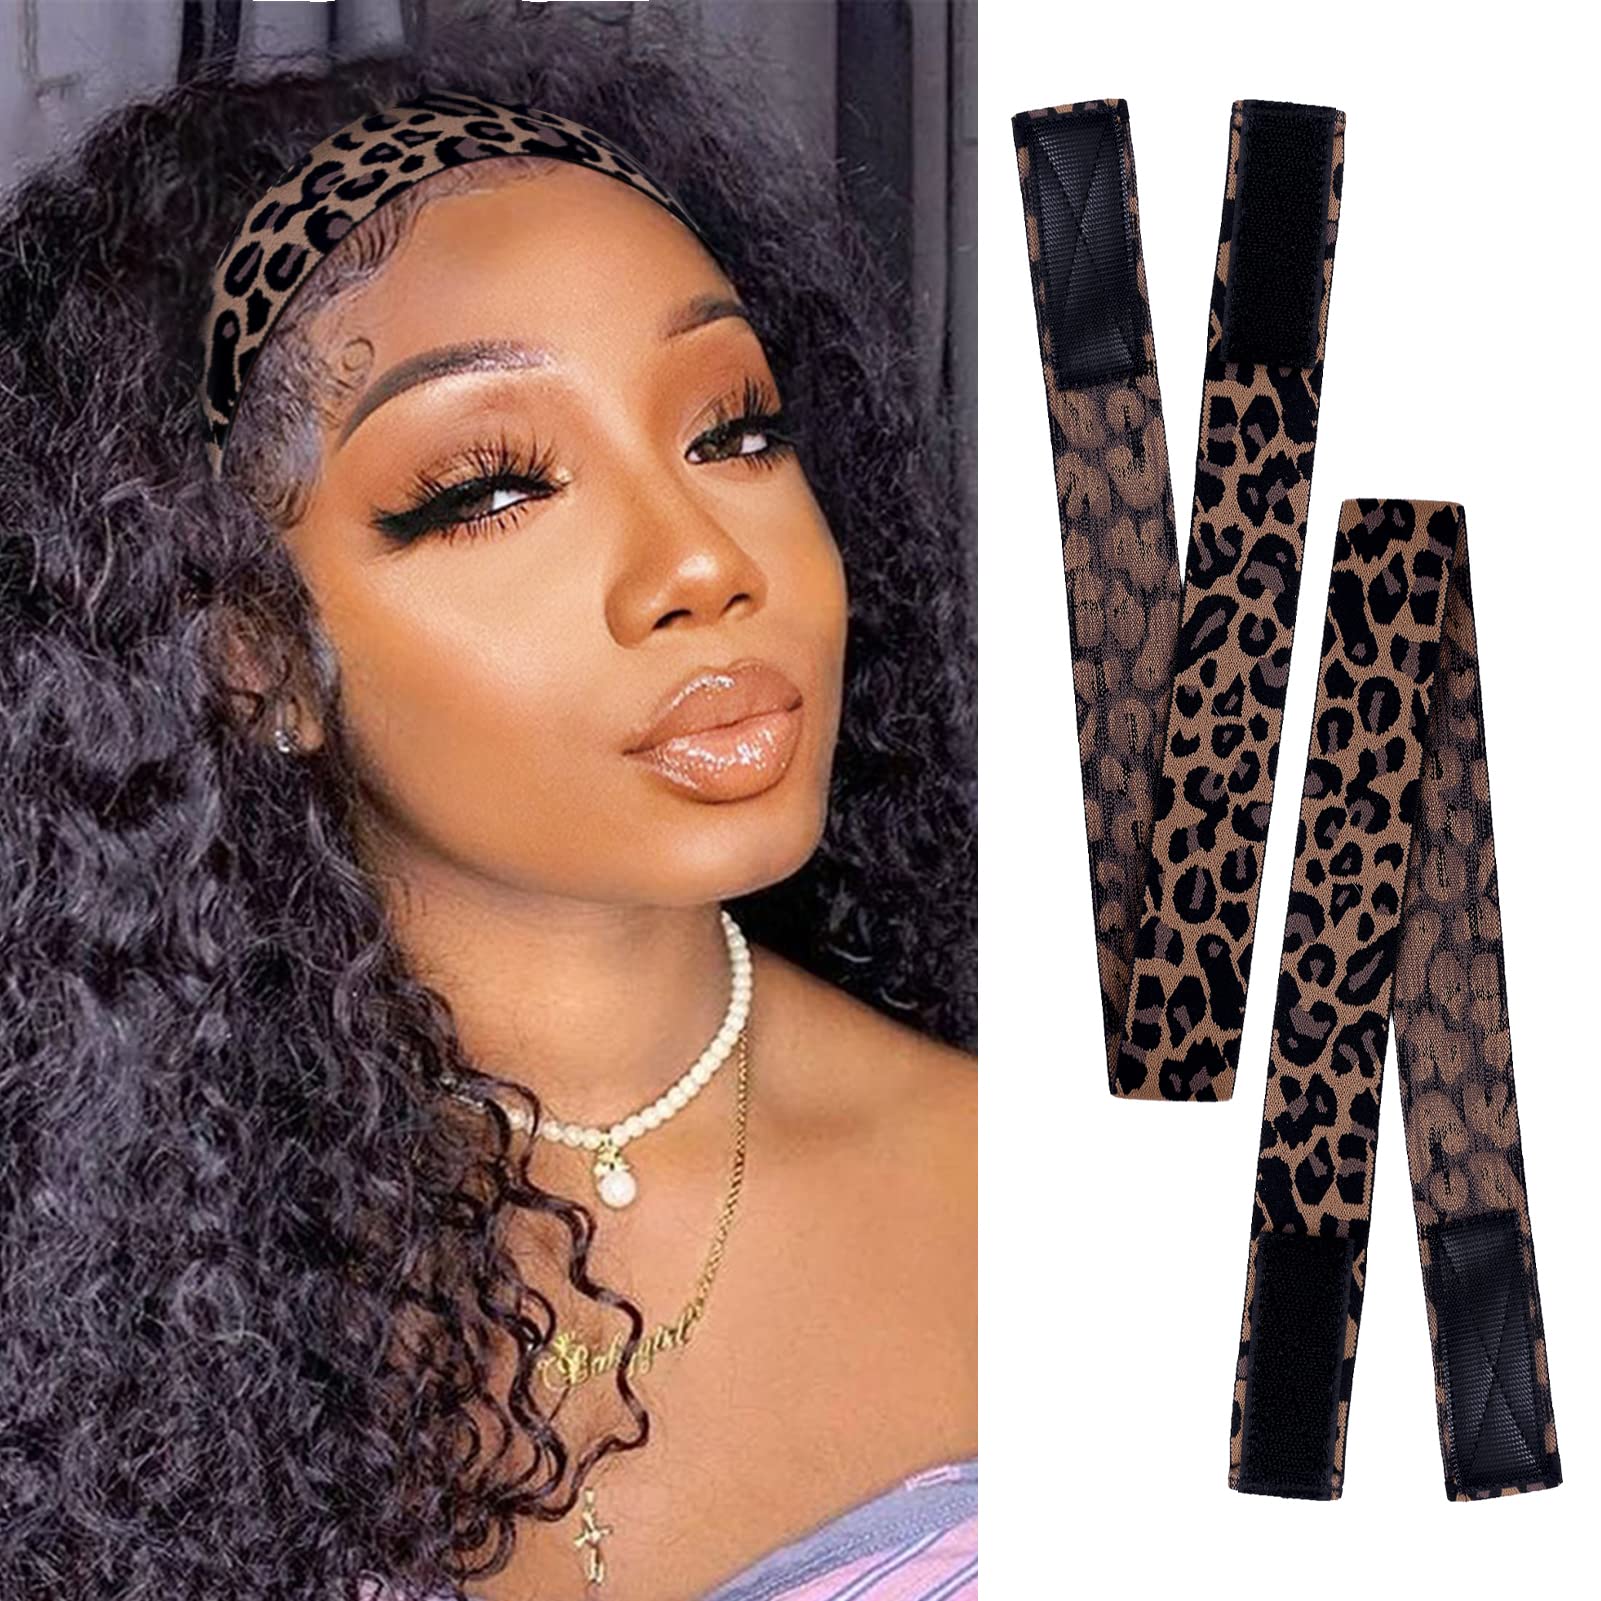 Wig Bands For Edges Lace Band With Ear Muffs Black Melting Band For Lace  Wig Adjustable Elastic Bands With Merry Christmas Print - AliExpress